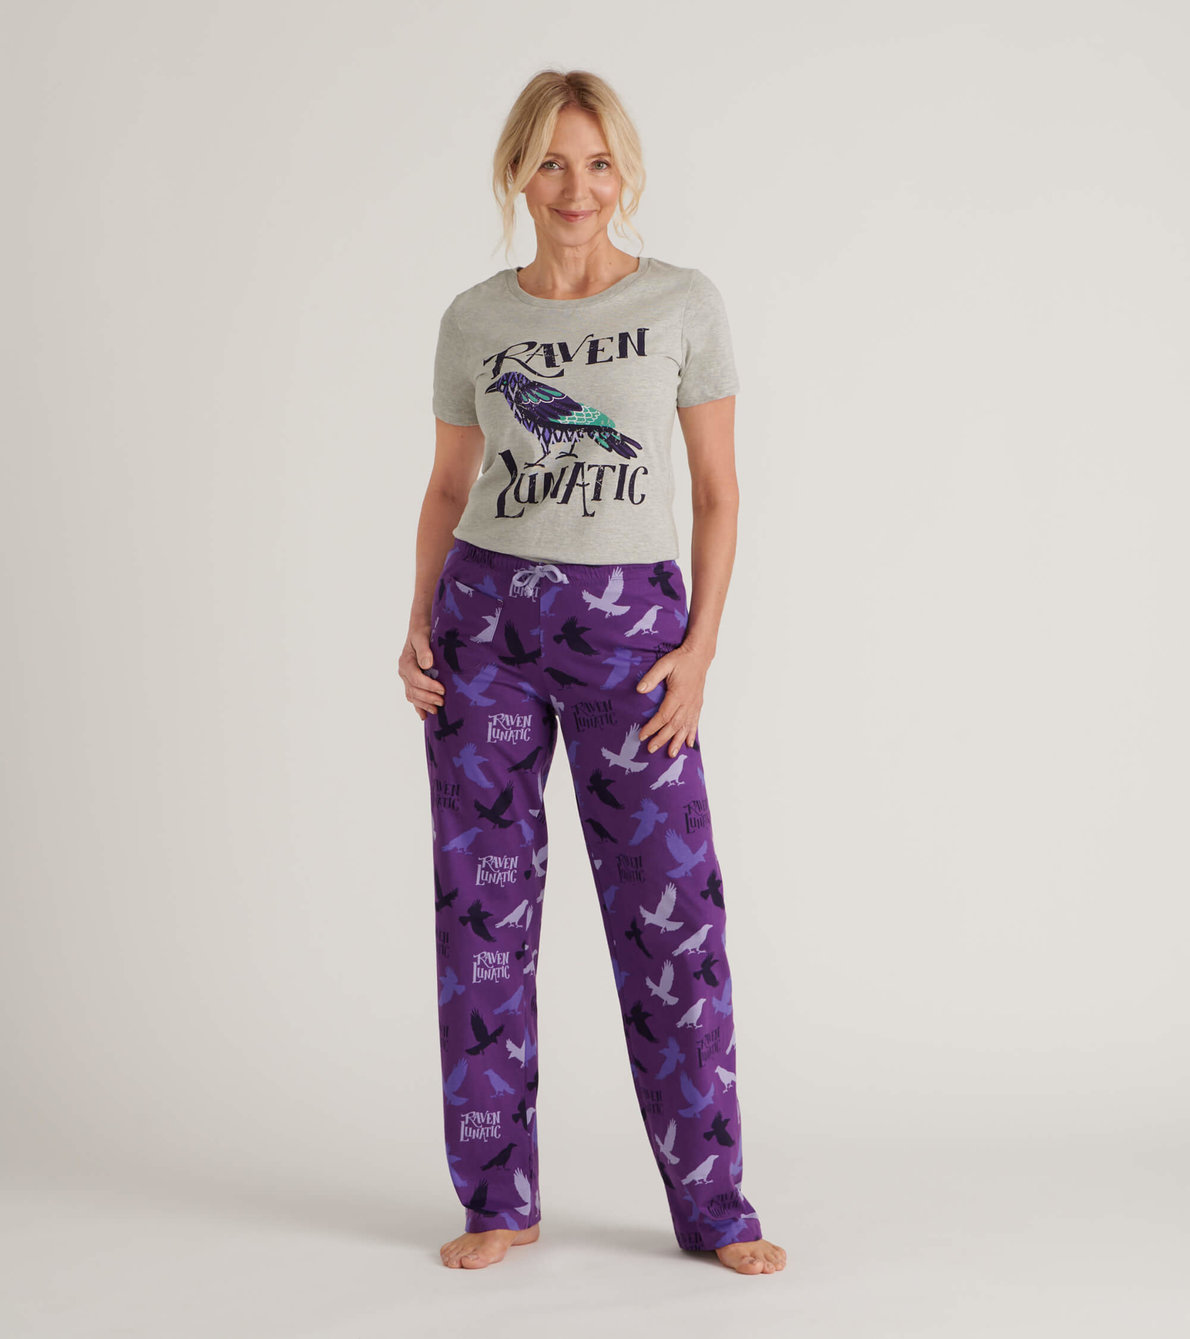 View larger image of Raven Lunatic Women's Tee and Pants Pajama Separates